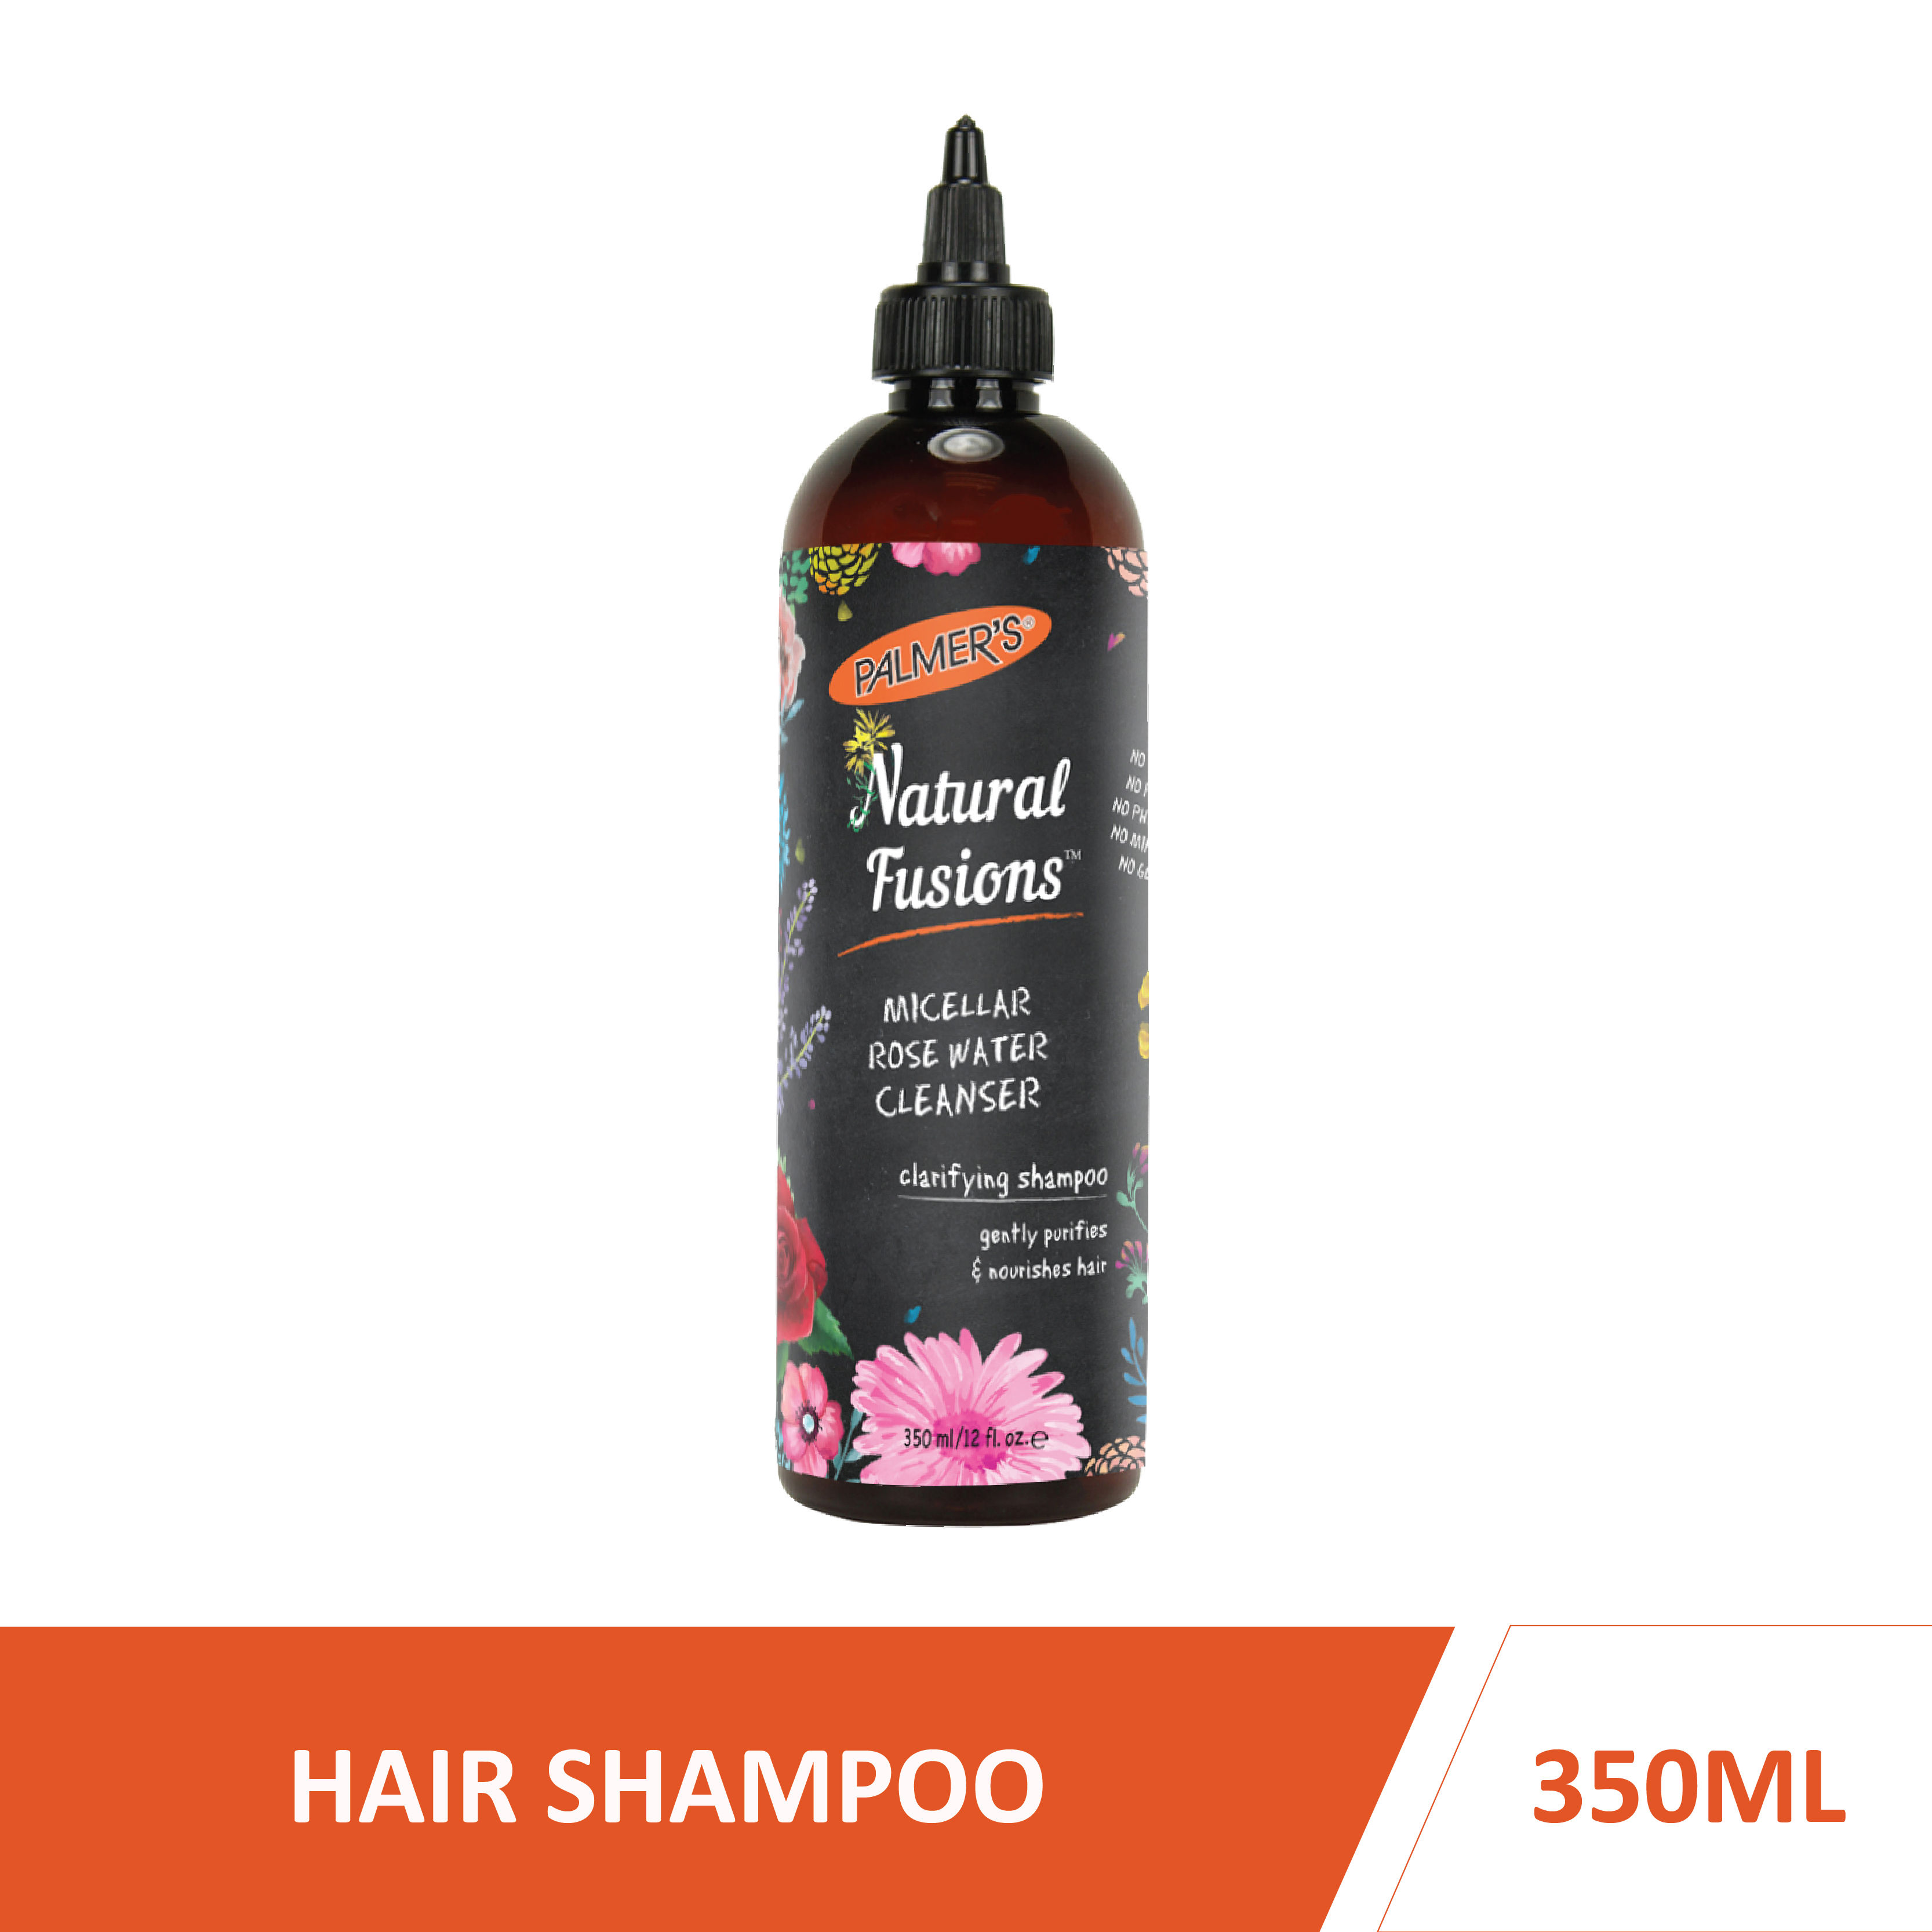 Palmers Natural Fusions Rose Water Hair Cleanser Shampoo